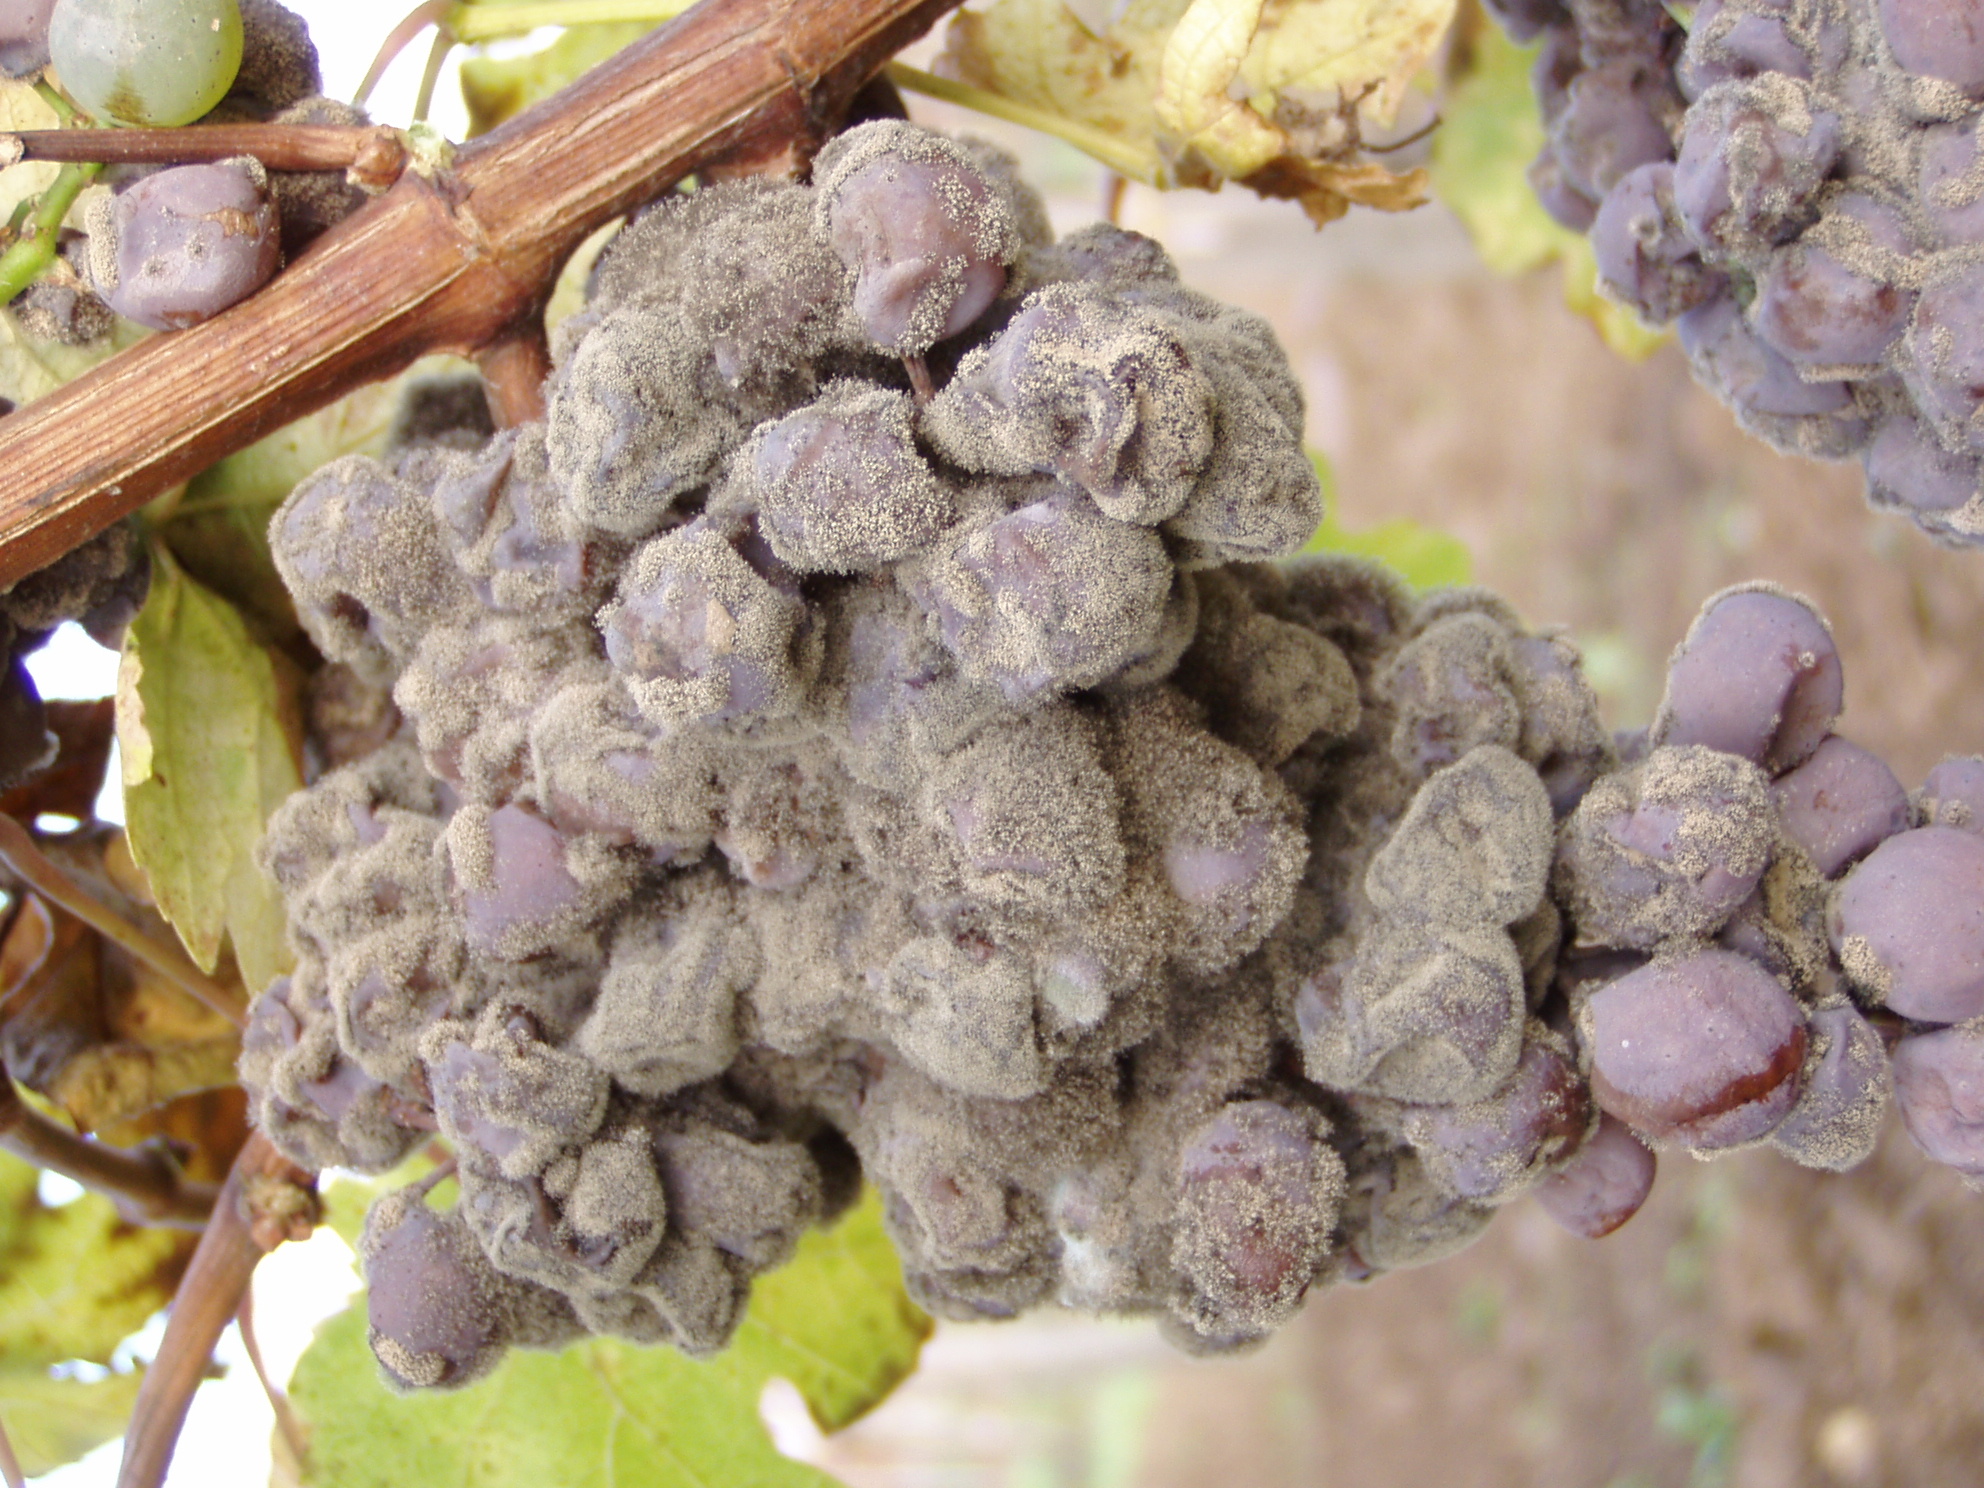 Botrytis on a bunch of wine grapes hanging on the vine